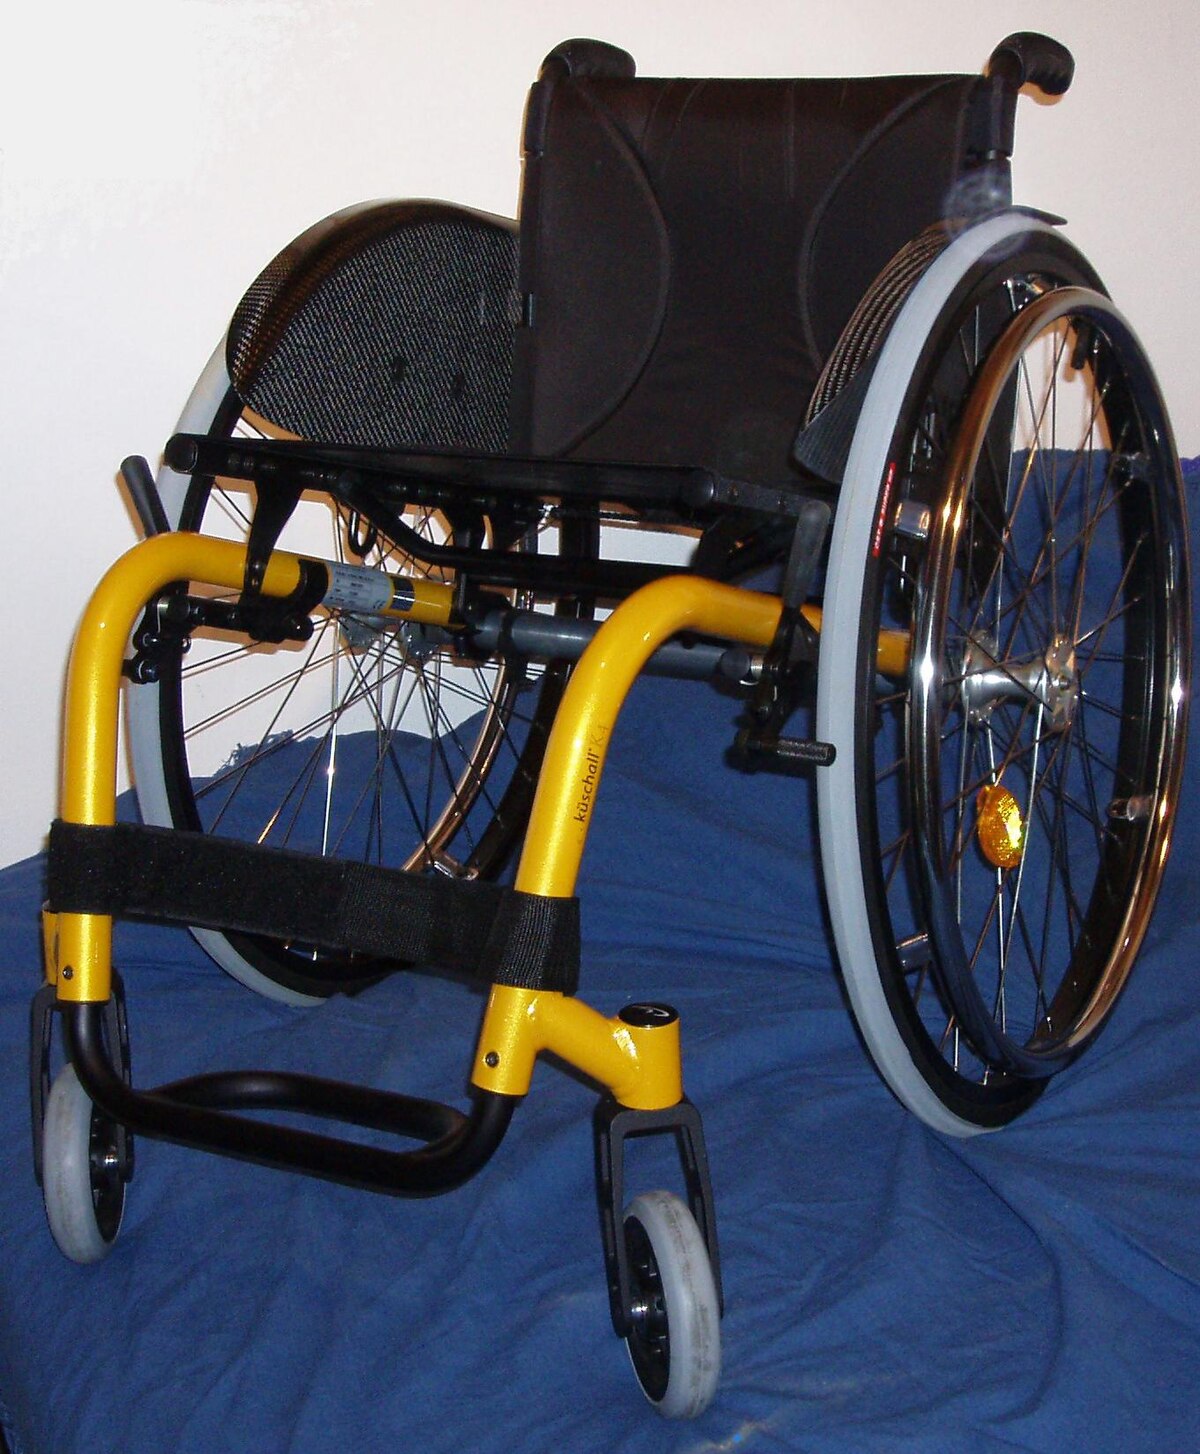 wheelchair for handicapped person